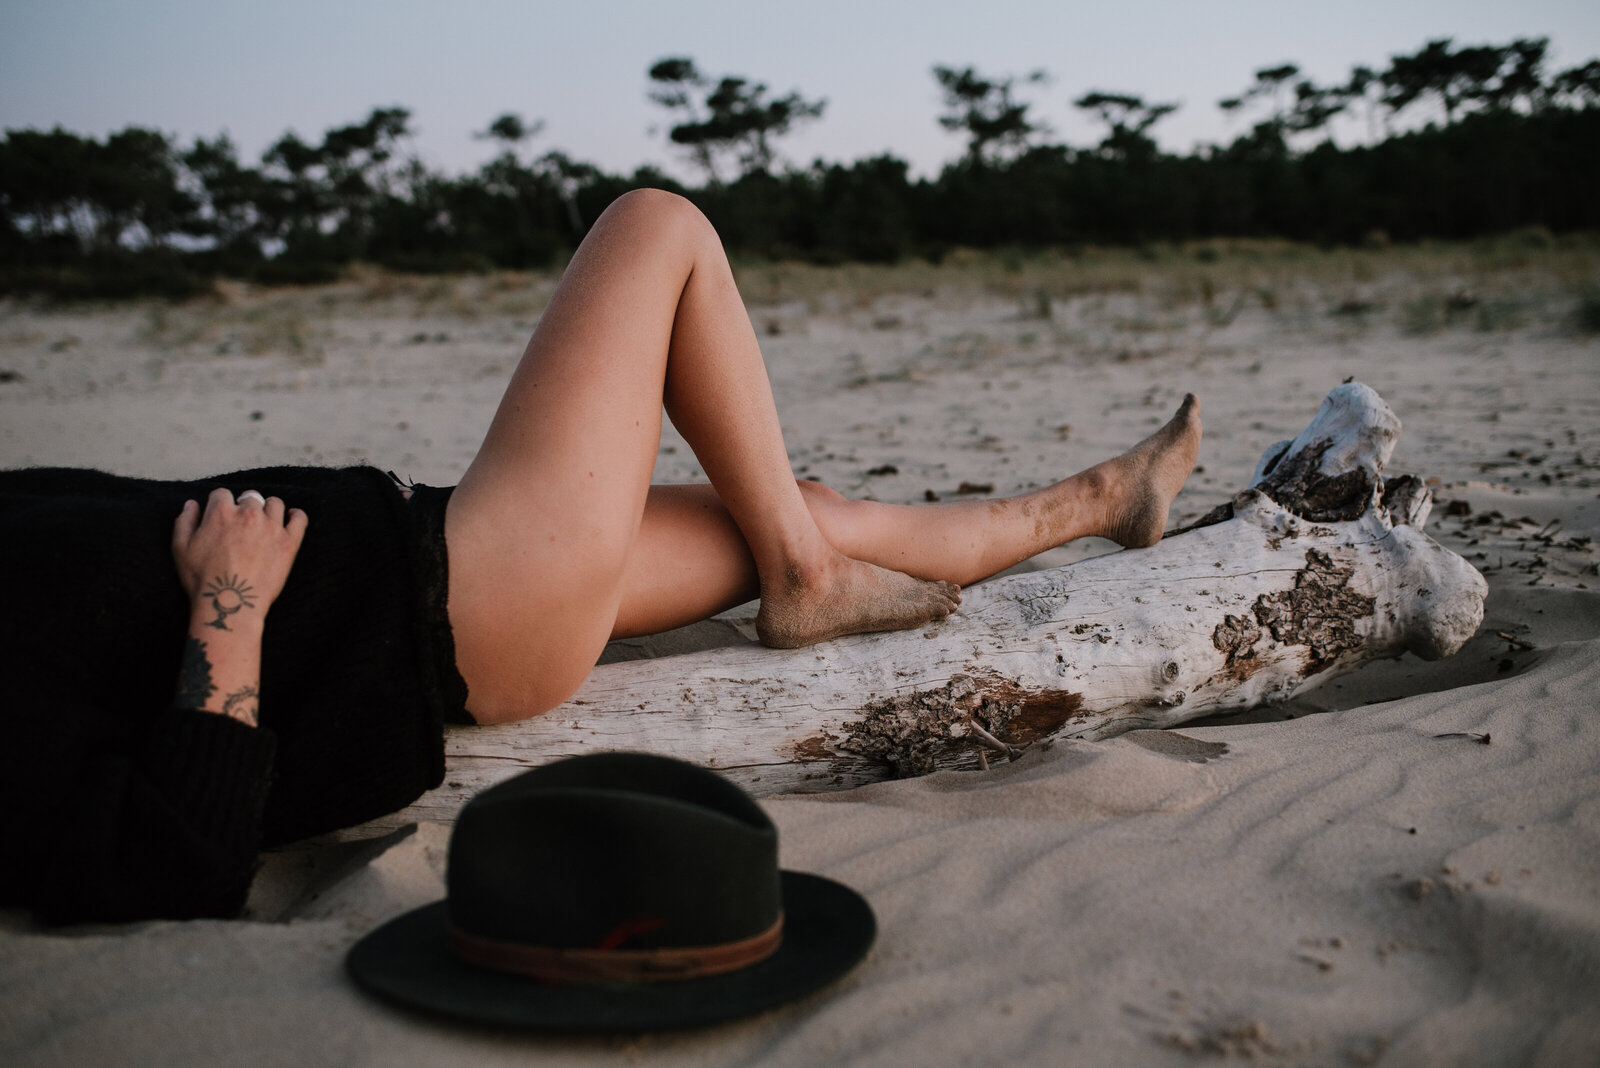 woman laying on a trea woman laying on dead tree, on a beach, her feet are bare and covered in sand